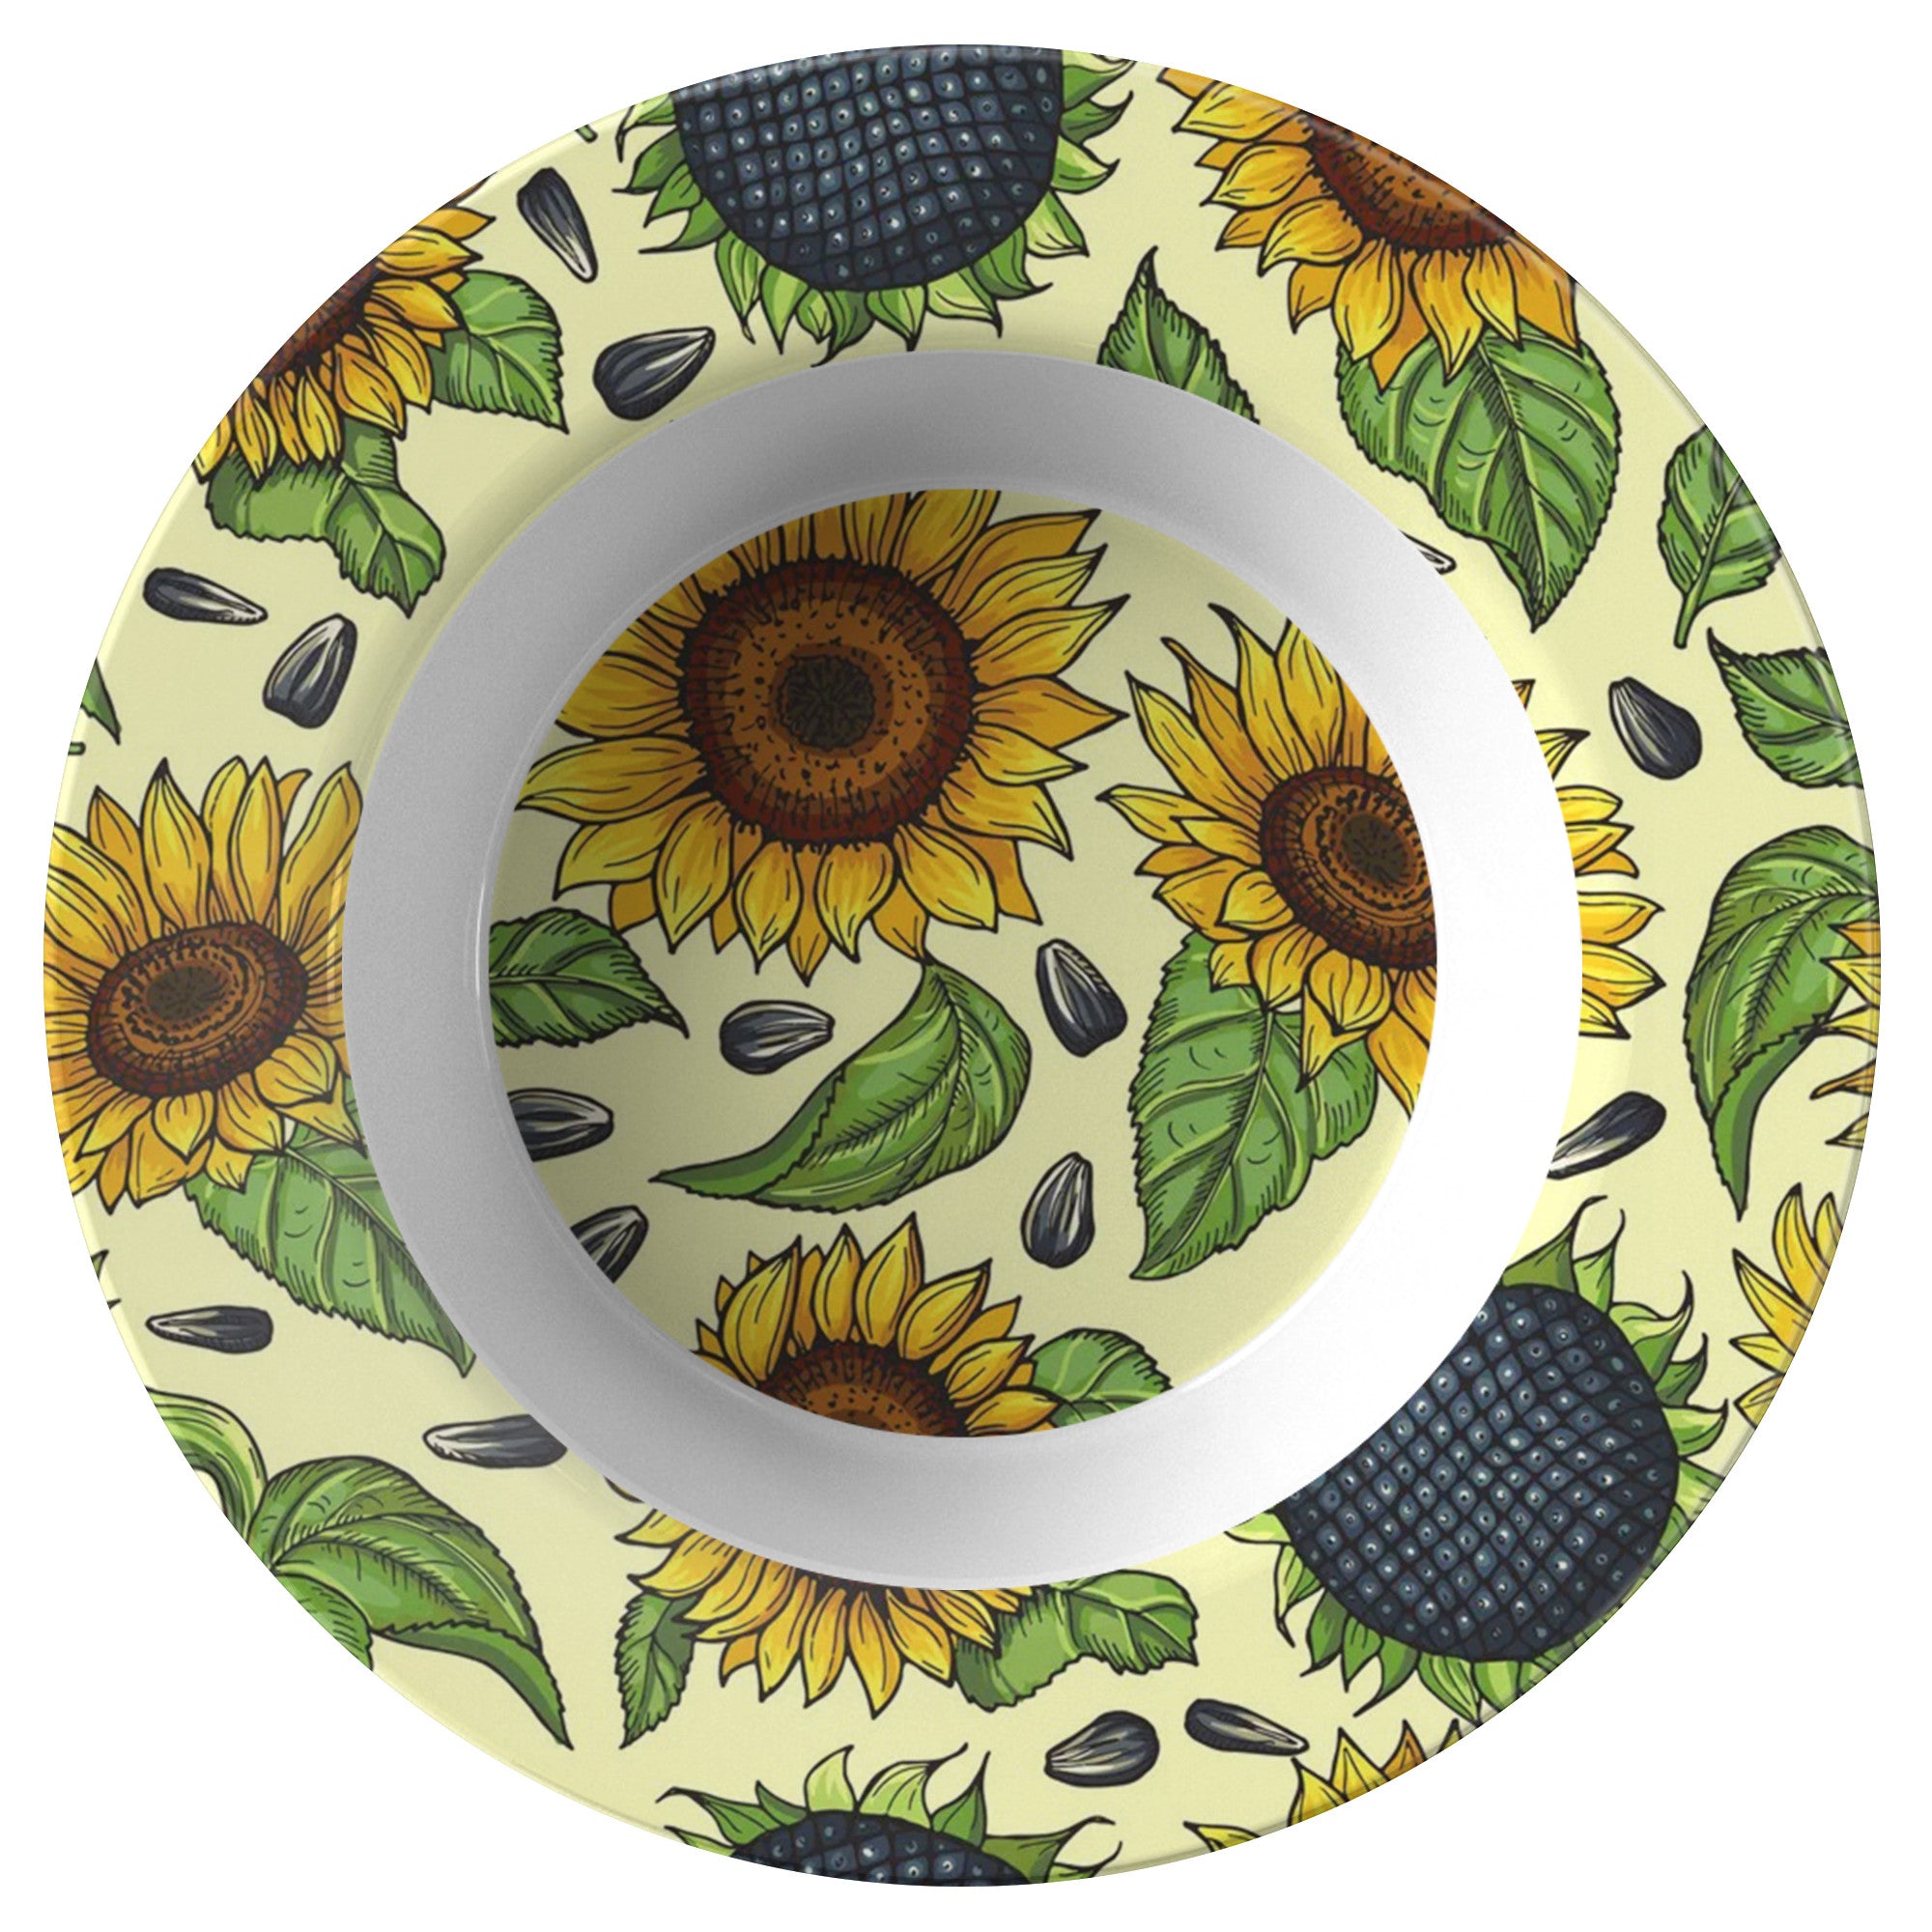 Printed Polymer Soup Bowl - Sunflowers